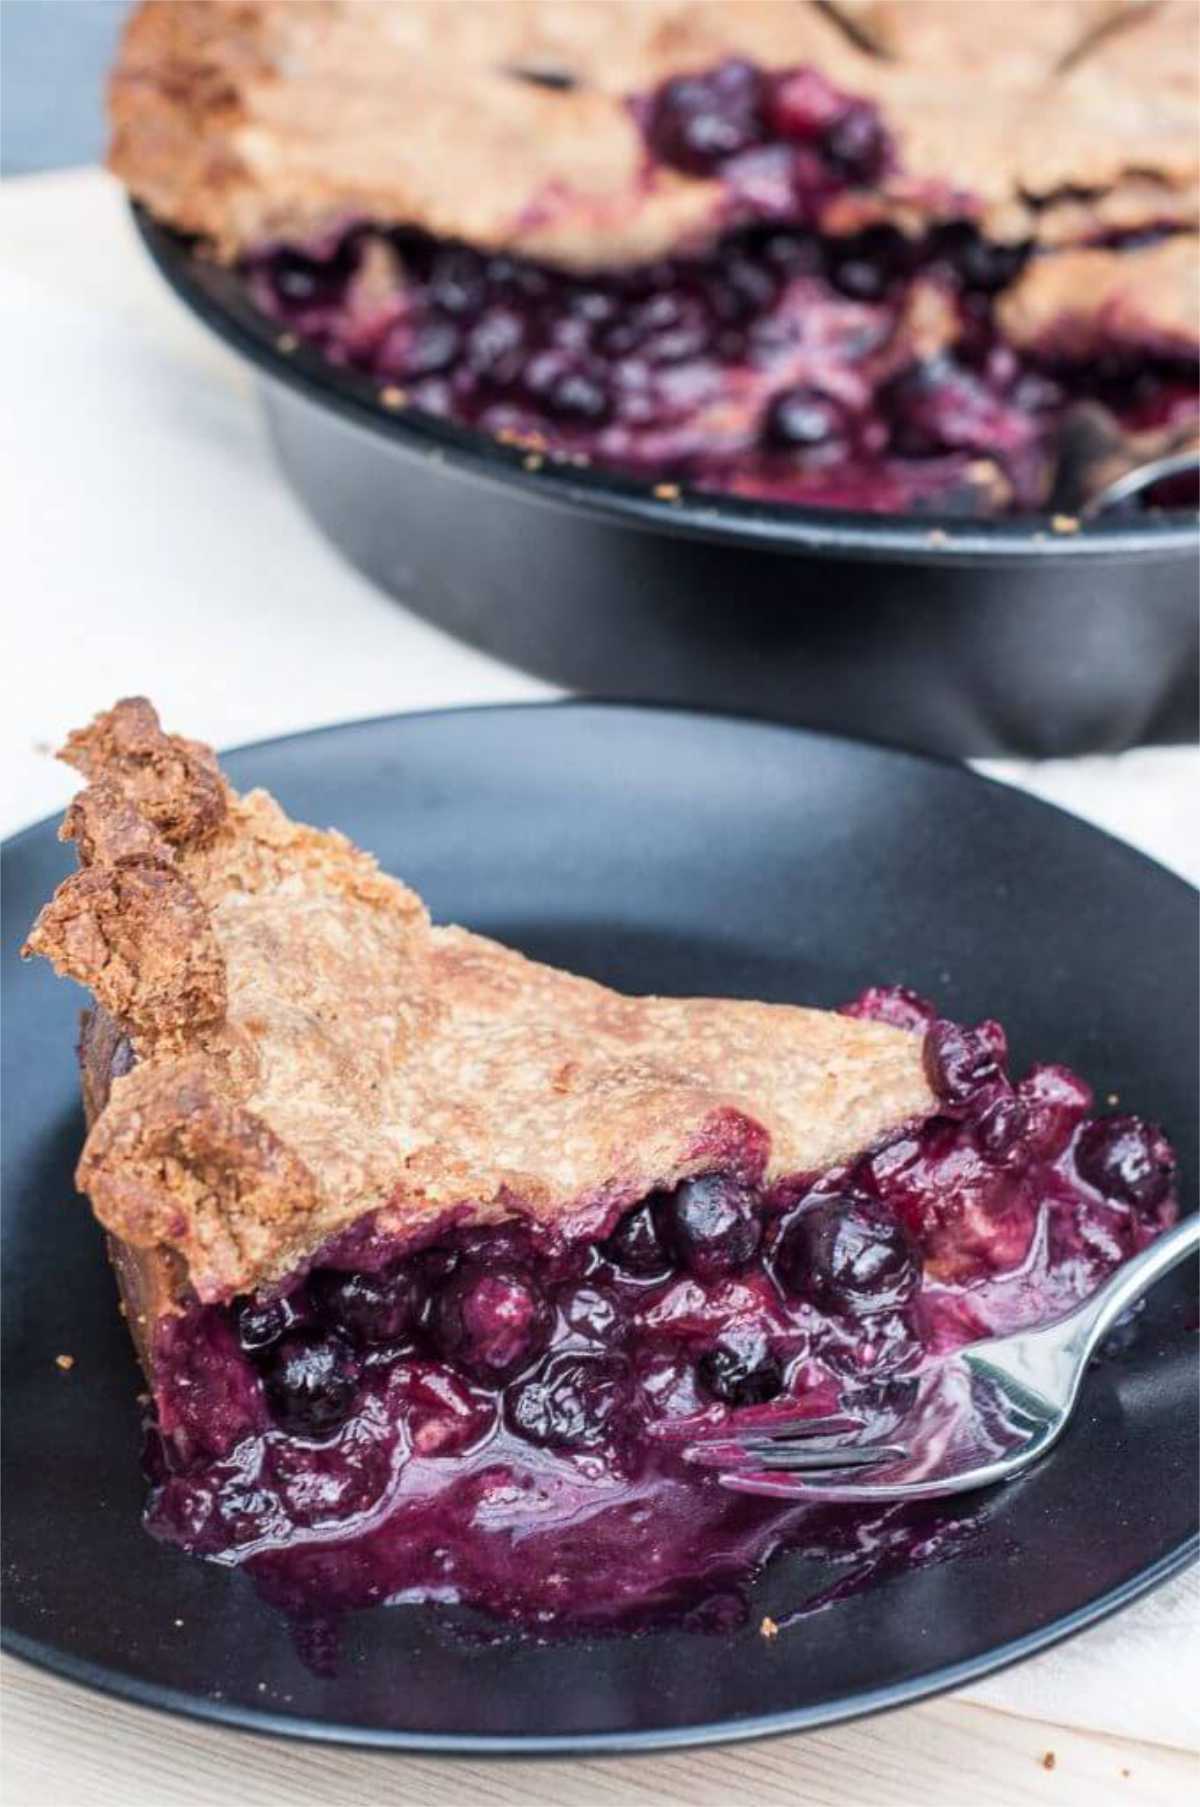 Blueberry Cranberry Pie on plate